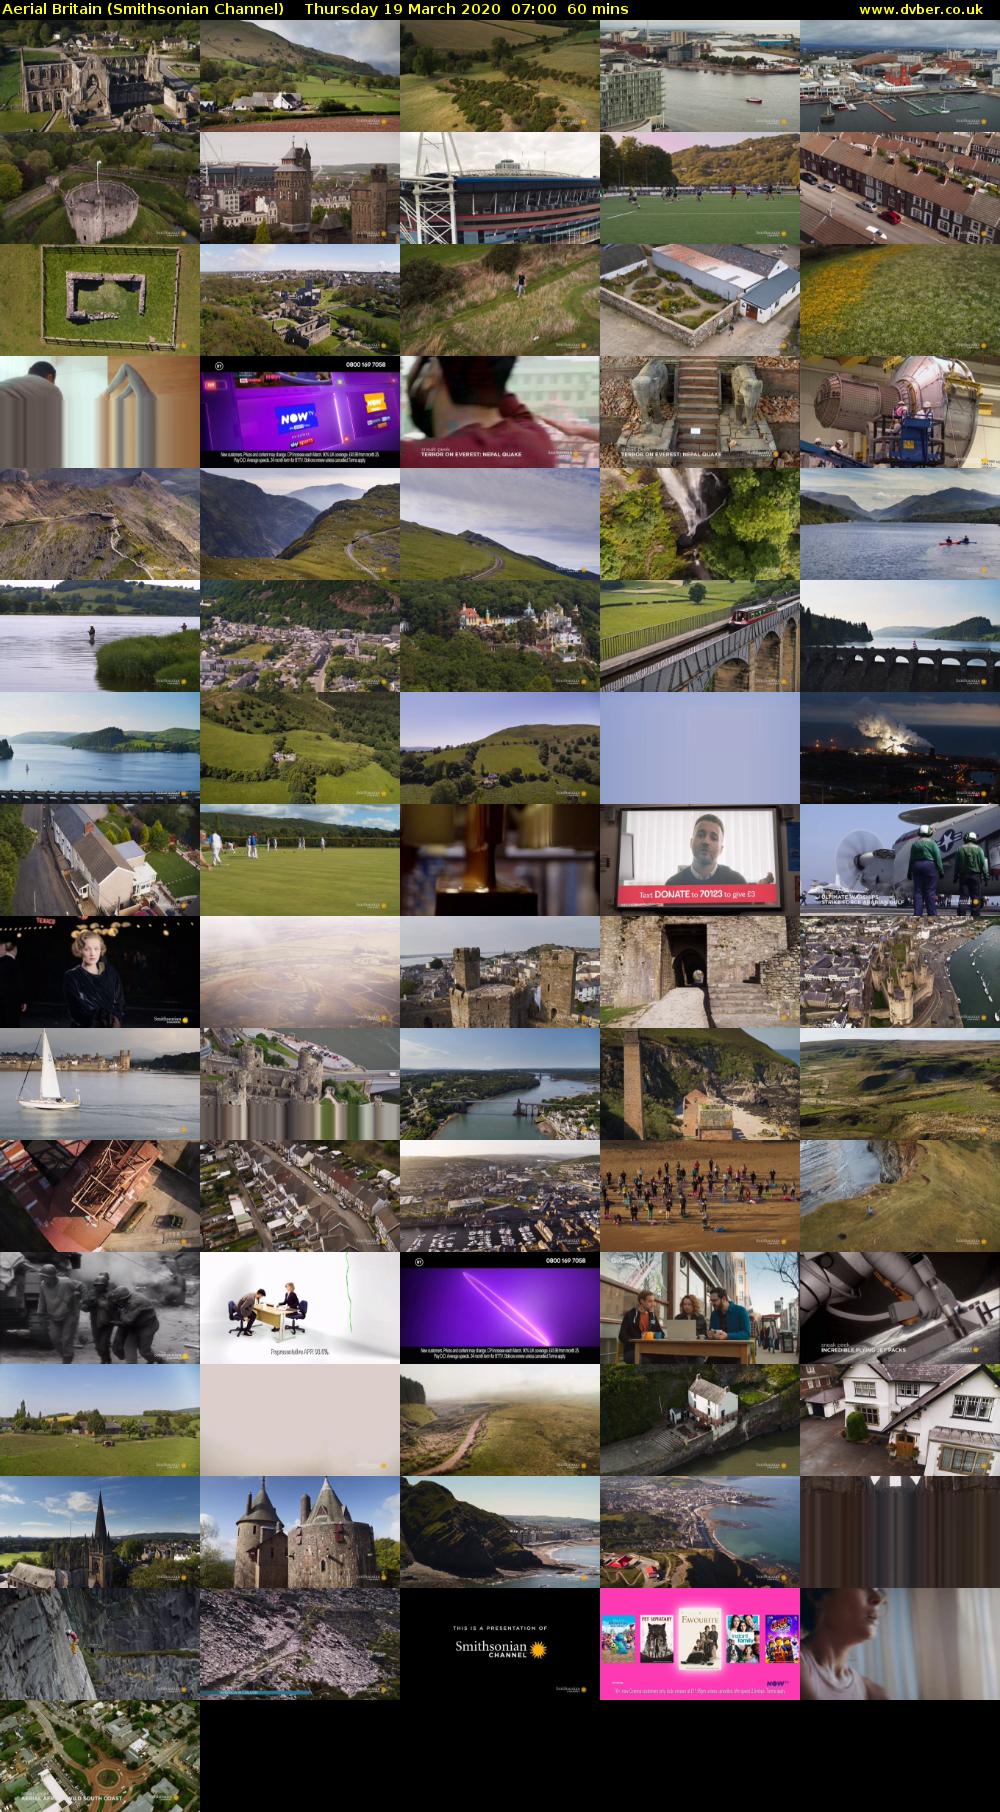 Aerial Britain (Smithsonian Channel) Thursday 19 March 2020 07:00 - 08:00